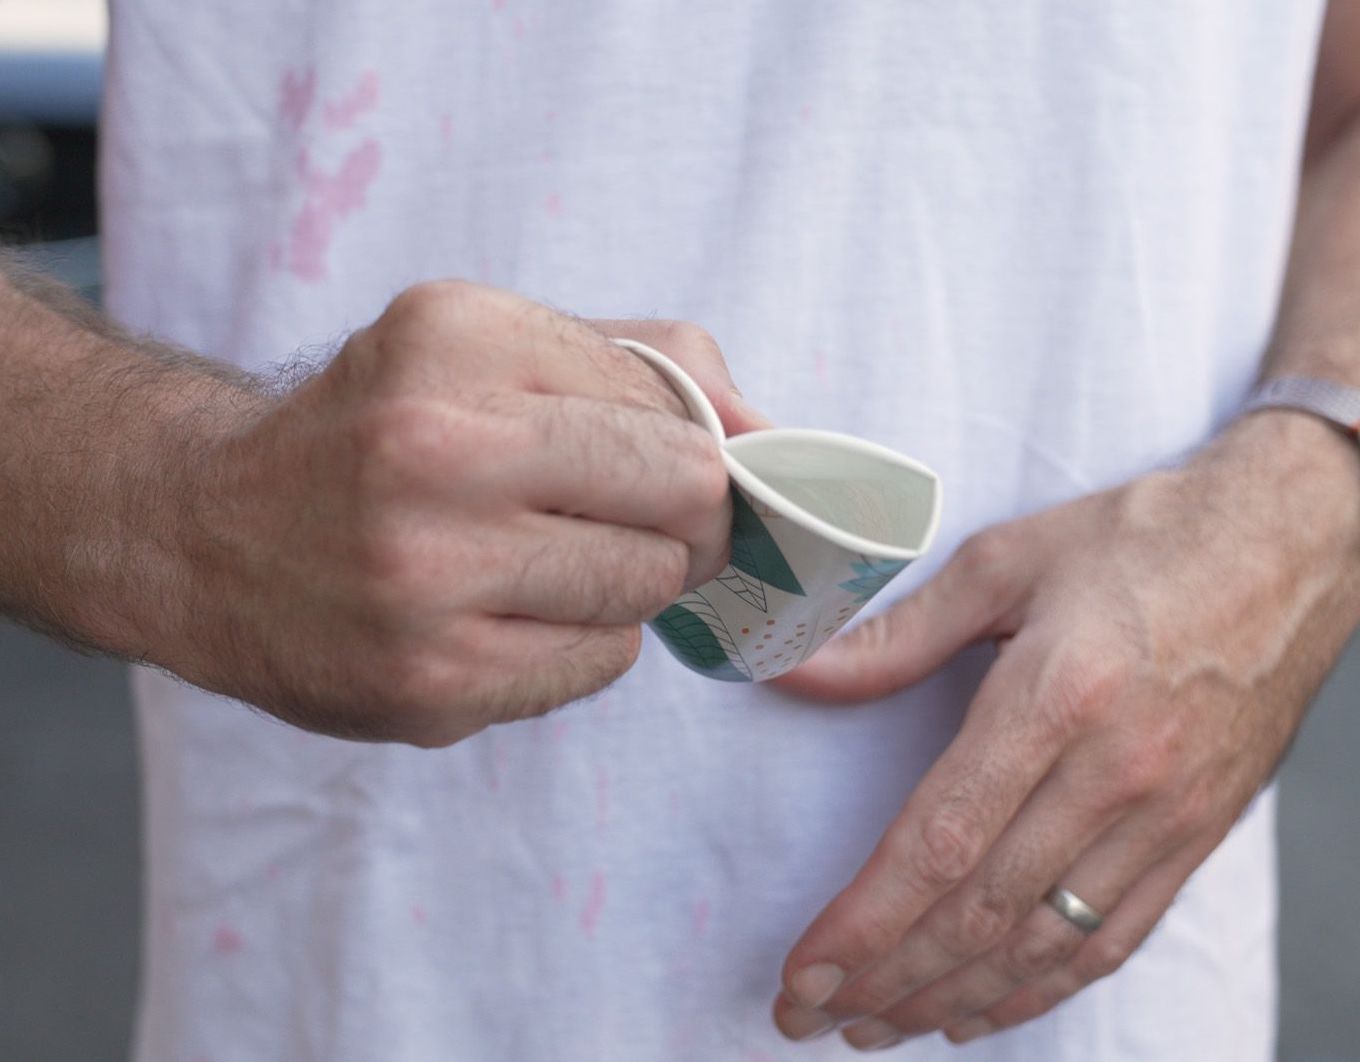 The &ldquo;pinch&rdquo; method for grabbing a cup of water. Source: Runner&rsquo;s World